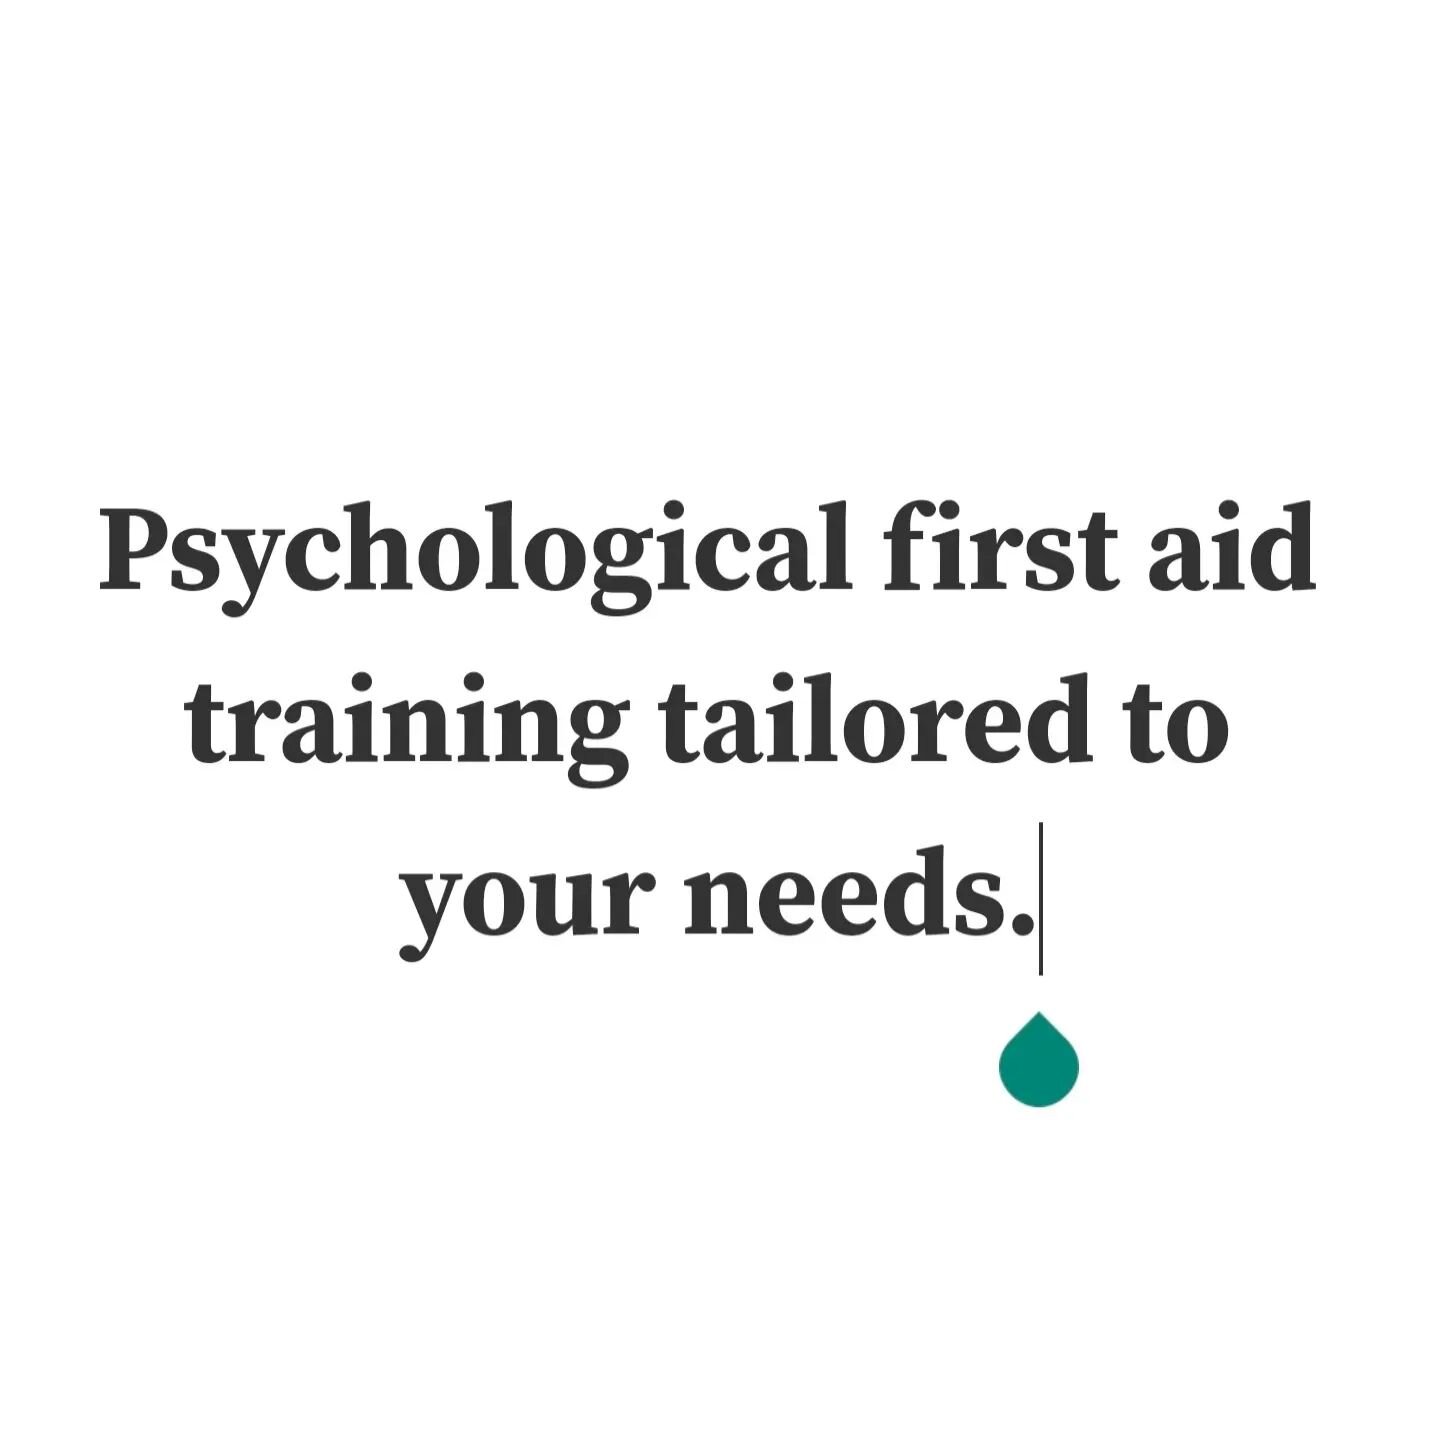 To help us gauge interest in the training and understand what you are looking to learn we have created a form with questions for you the audience. It will take a few minutes to complete and can be completely anonymous if you don't share your email ad